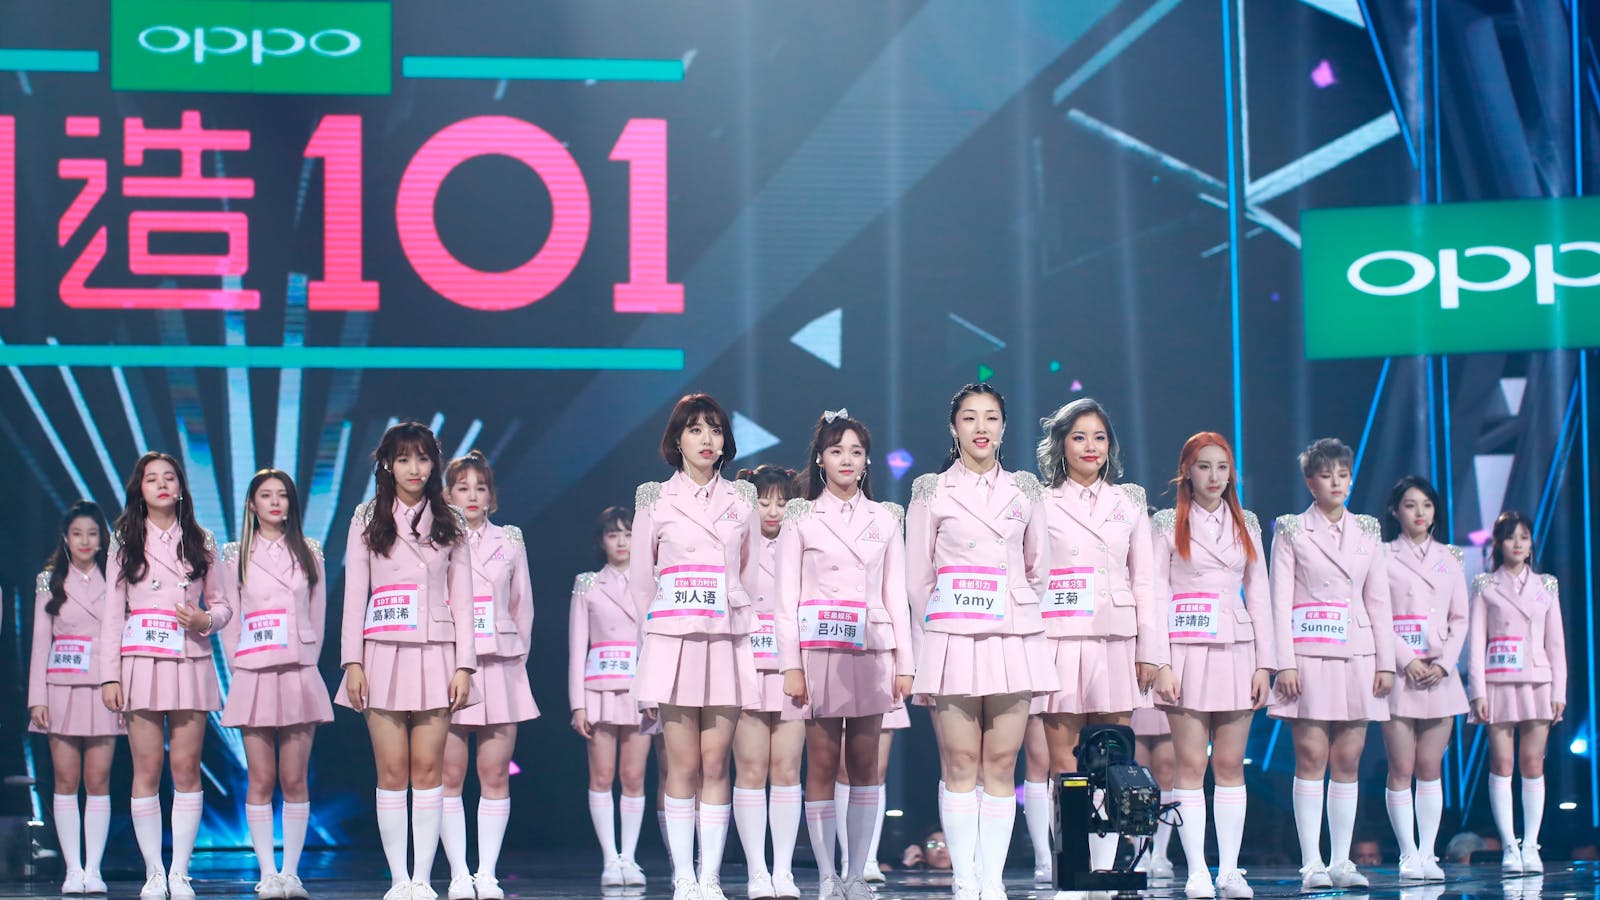 Finalists in the online video show 'Produce 101' on an episode in June. Photo by AP